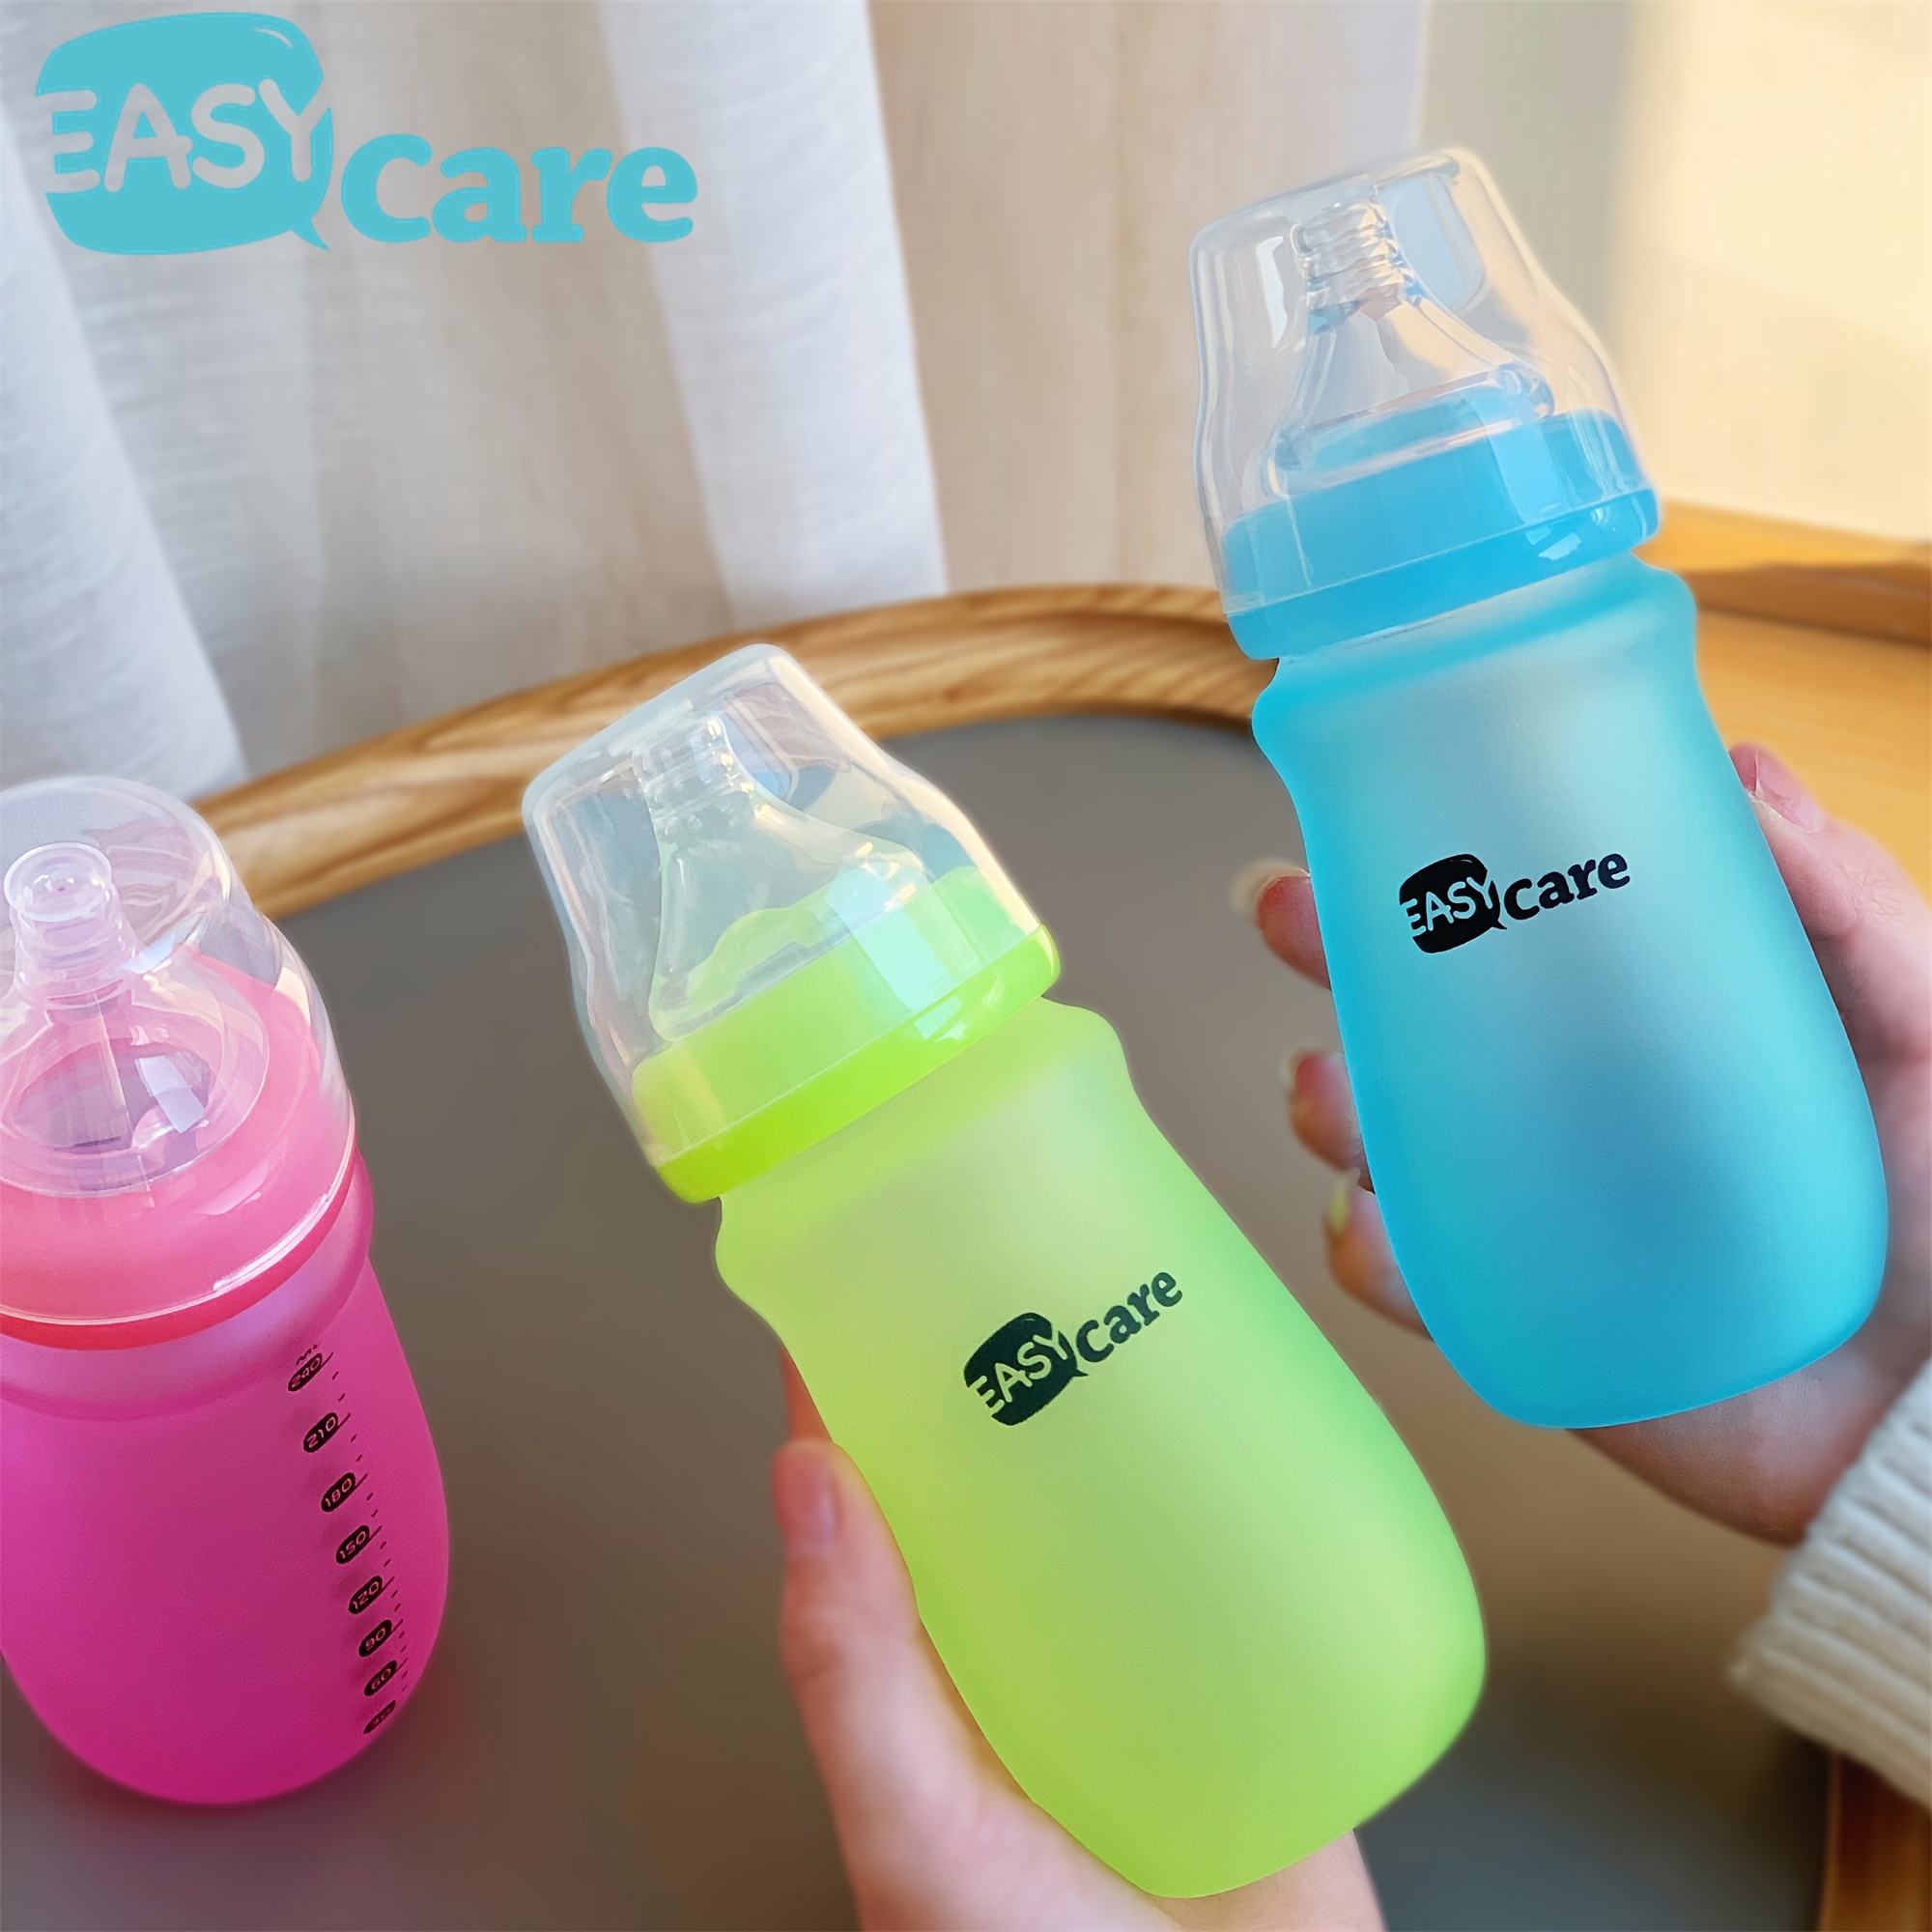 

Easycare Silicone Milk Bottle, Learning Cup, Baby And Children's Water Cup, Straw Cup, Baby Over 6 Months Old Duckbill Cup, Breast Milk, Natural Taste, Safe And Explosion-proof, Bpa Free